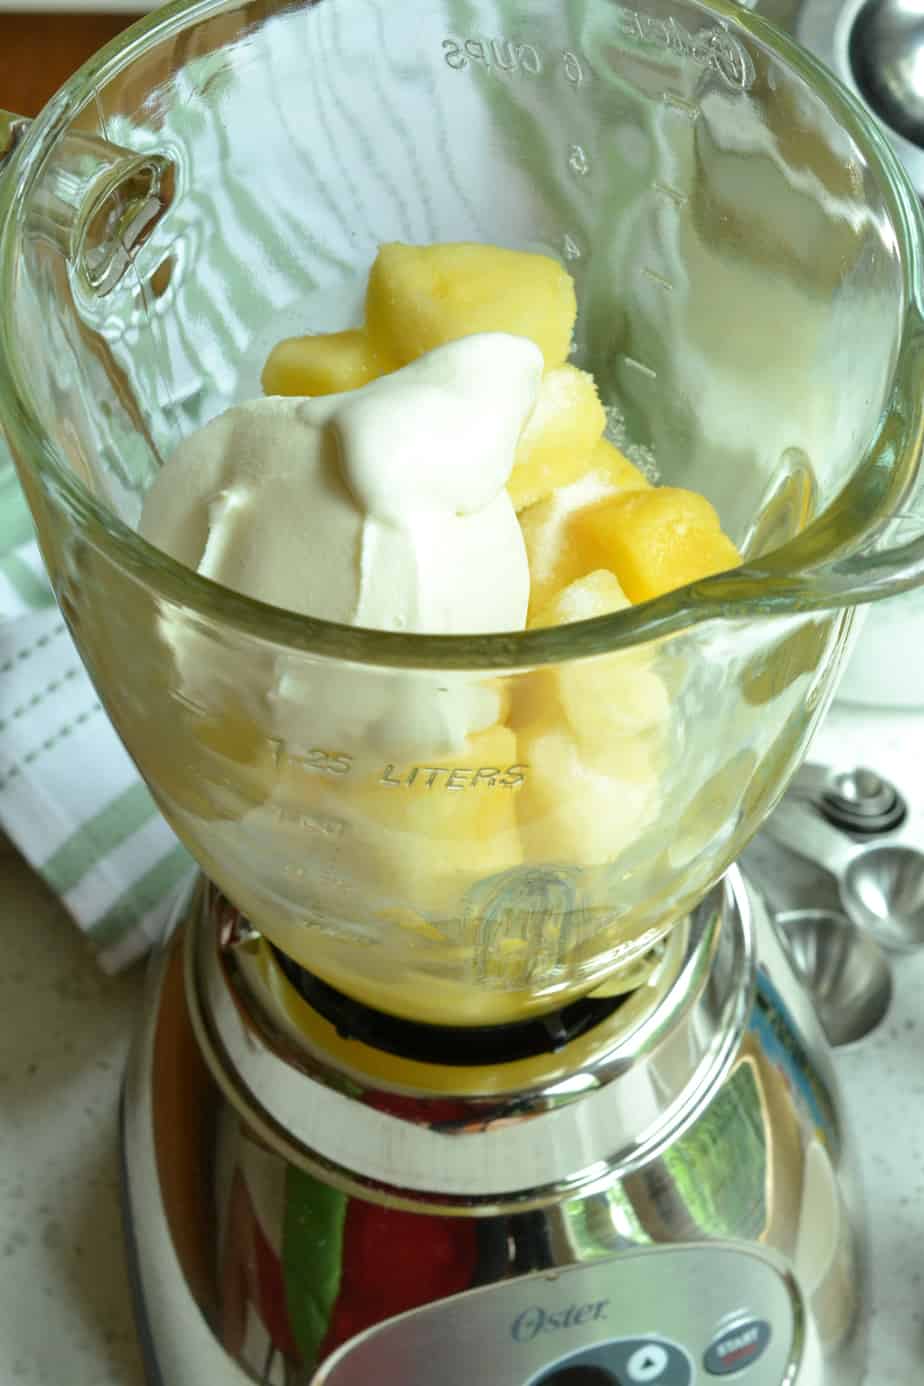 Place all the ingredients for dole whip in a blender. 